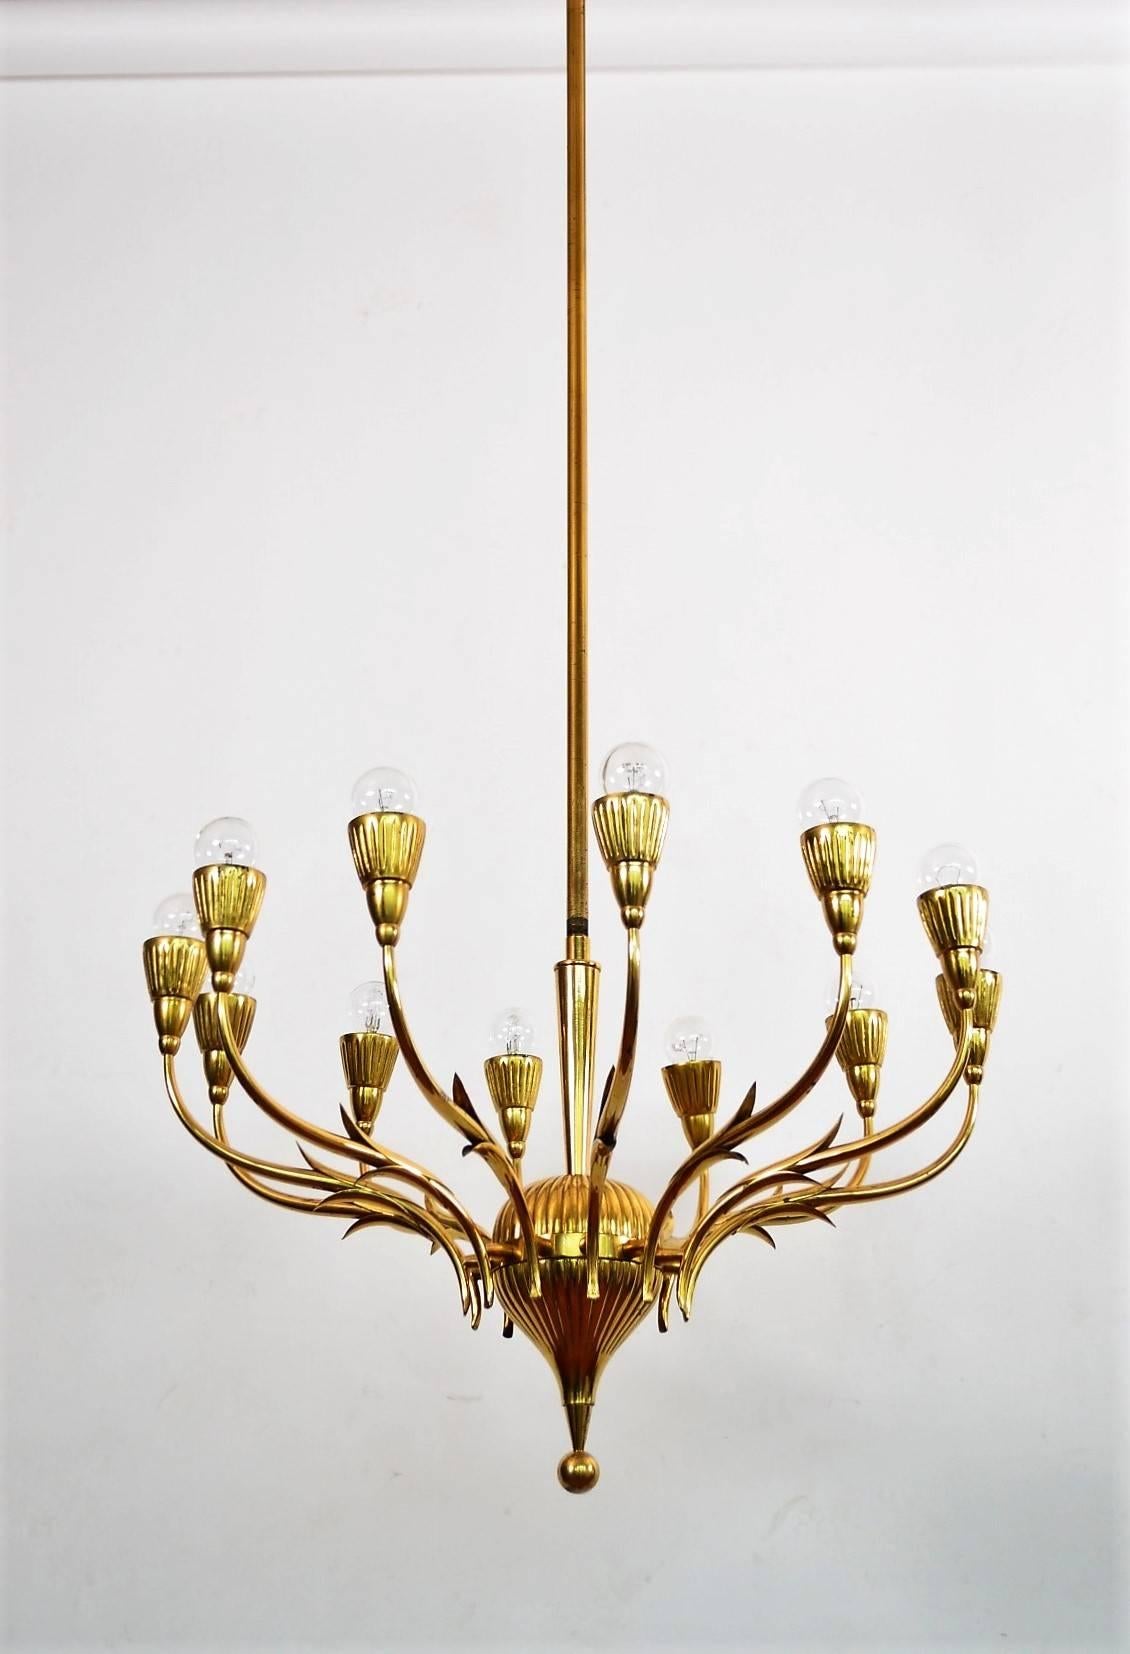 Gorgeous and elegant midcentury full brass chandelier with long original brass rod, suitable for rooms with high ceiling, entrance hall or staircase. The height of the rod can be shortened on request.
Made in Italy, 1950s.
The chandelier is equipped